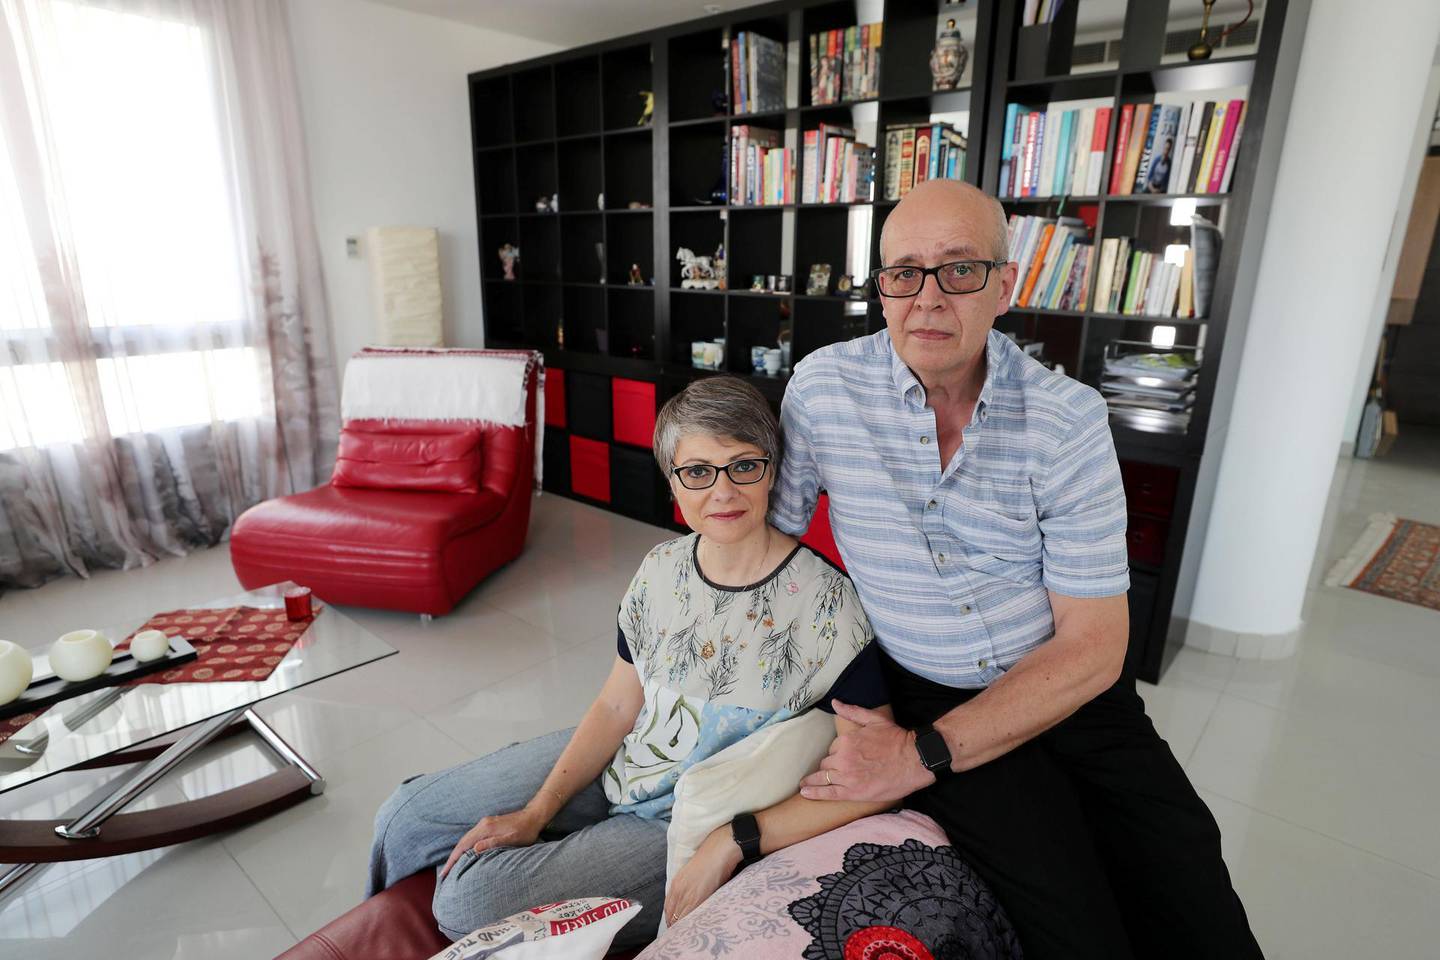 Dubai, United Arab Emirates - August 04, 2019: Lina and Omar Hariri who are a couple benefitting from new visa rules for husbands. Sunday the 4th of August 2019. Living Legends, Dubai. Chris Whiteoak / The National